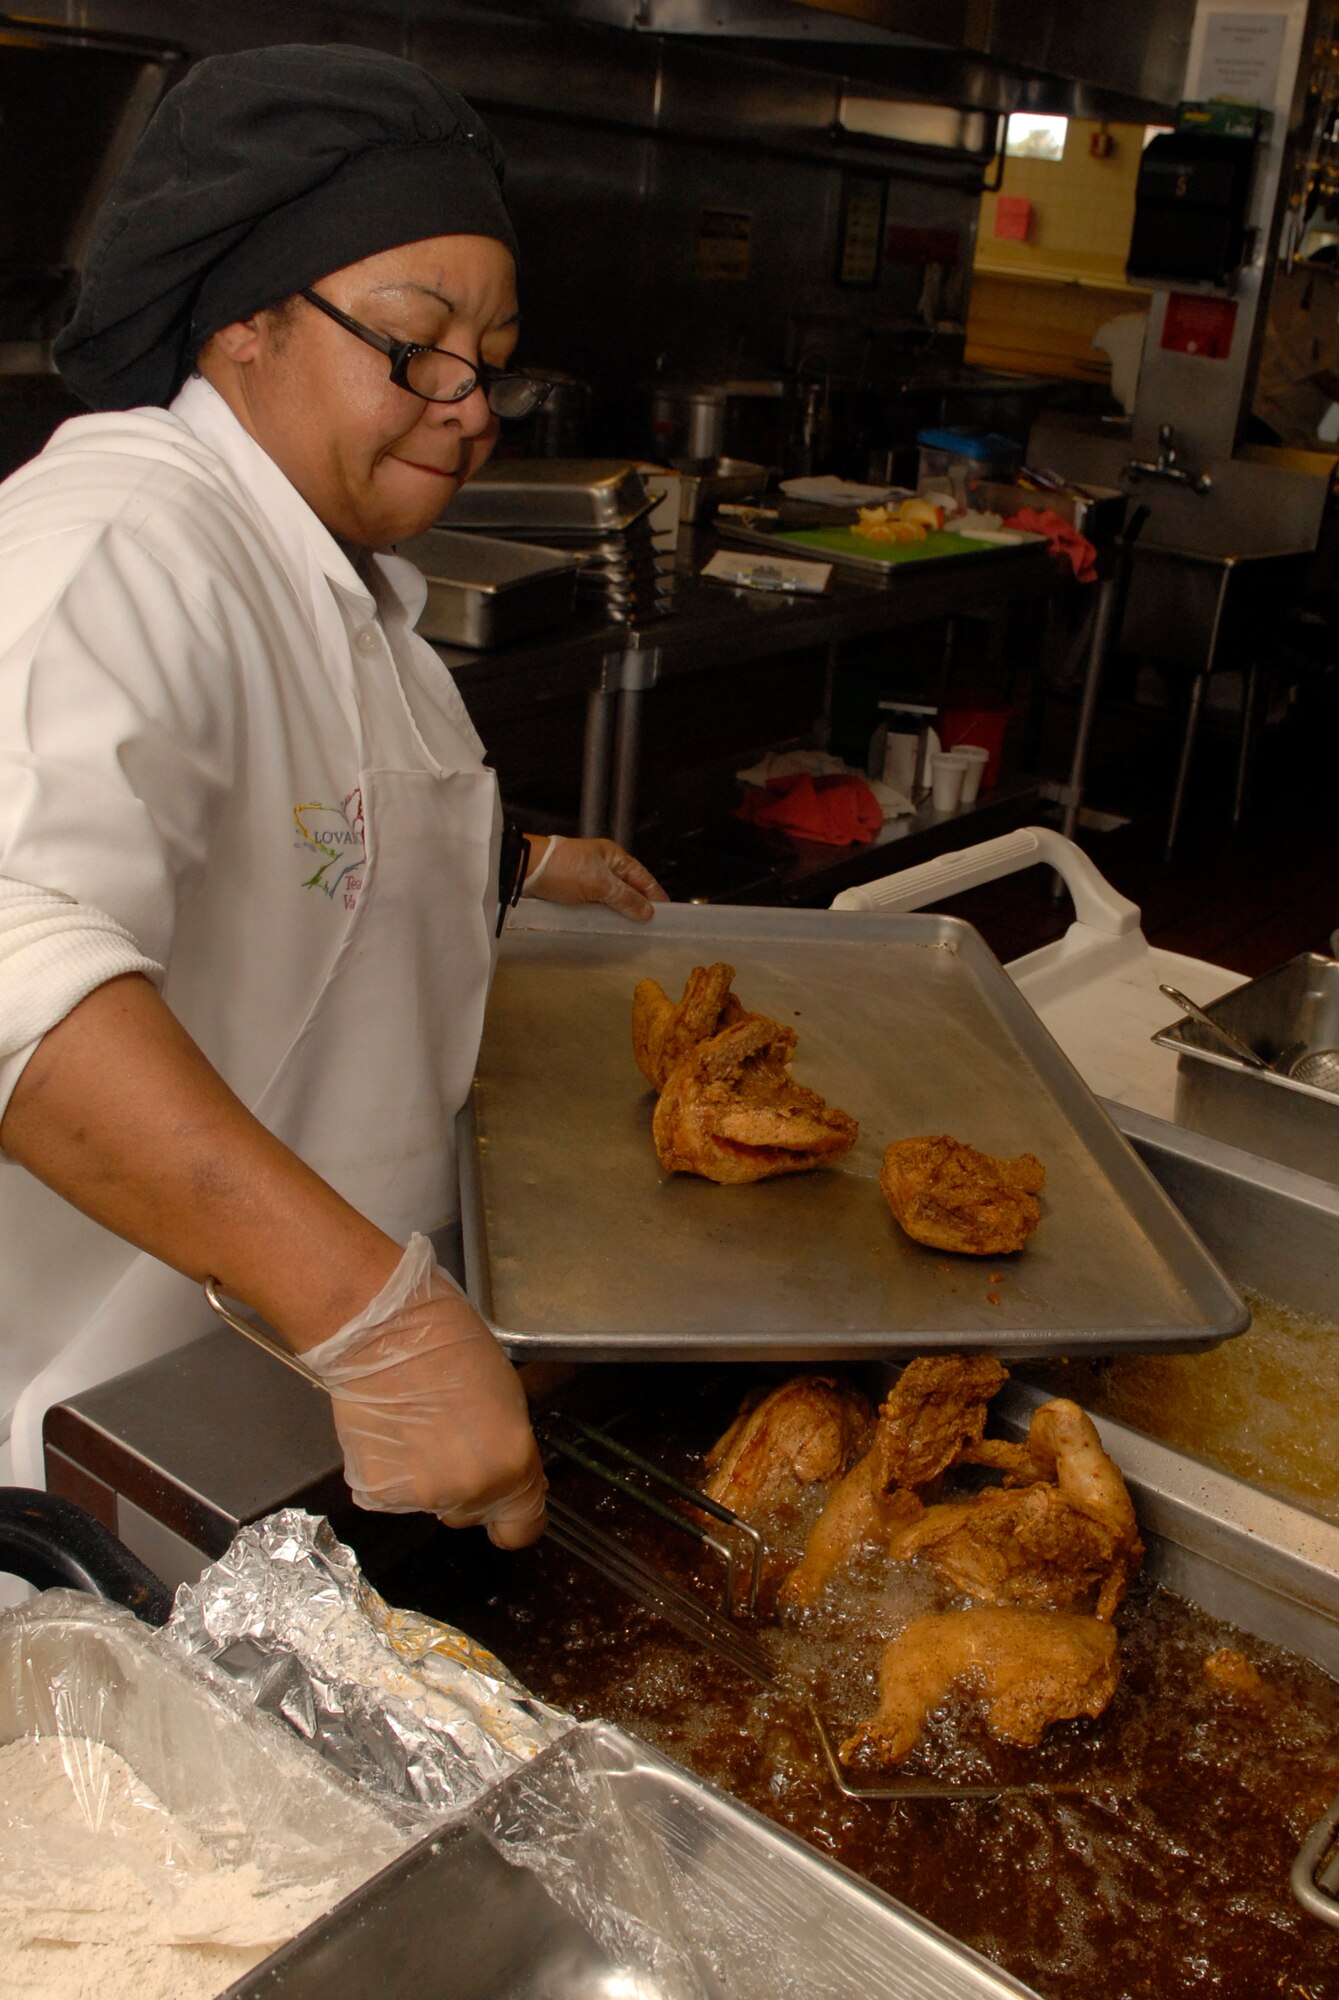 VANDENBERG AIR FORCE BASE, Calif. -- Betty Conley, a lead cook at Breakers Dining Facility, moves baked chicken using a utensil March 18. The facility is responsible for providing the nutrition Airmen need to perform their duties by being both healthy and affordable. (U.S. Air Force photo/Senior Airman Christian Thomas)